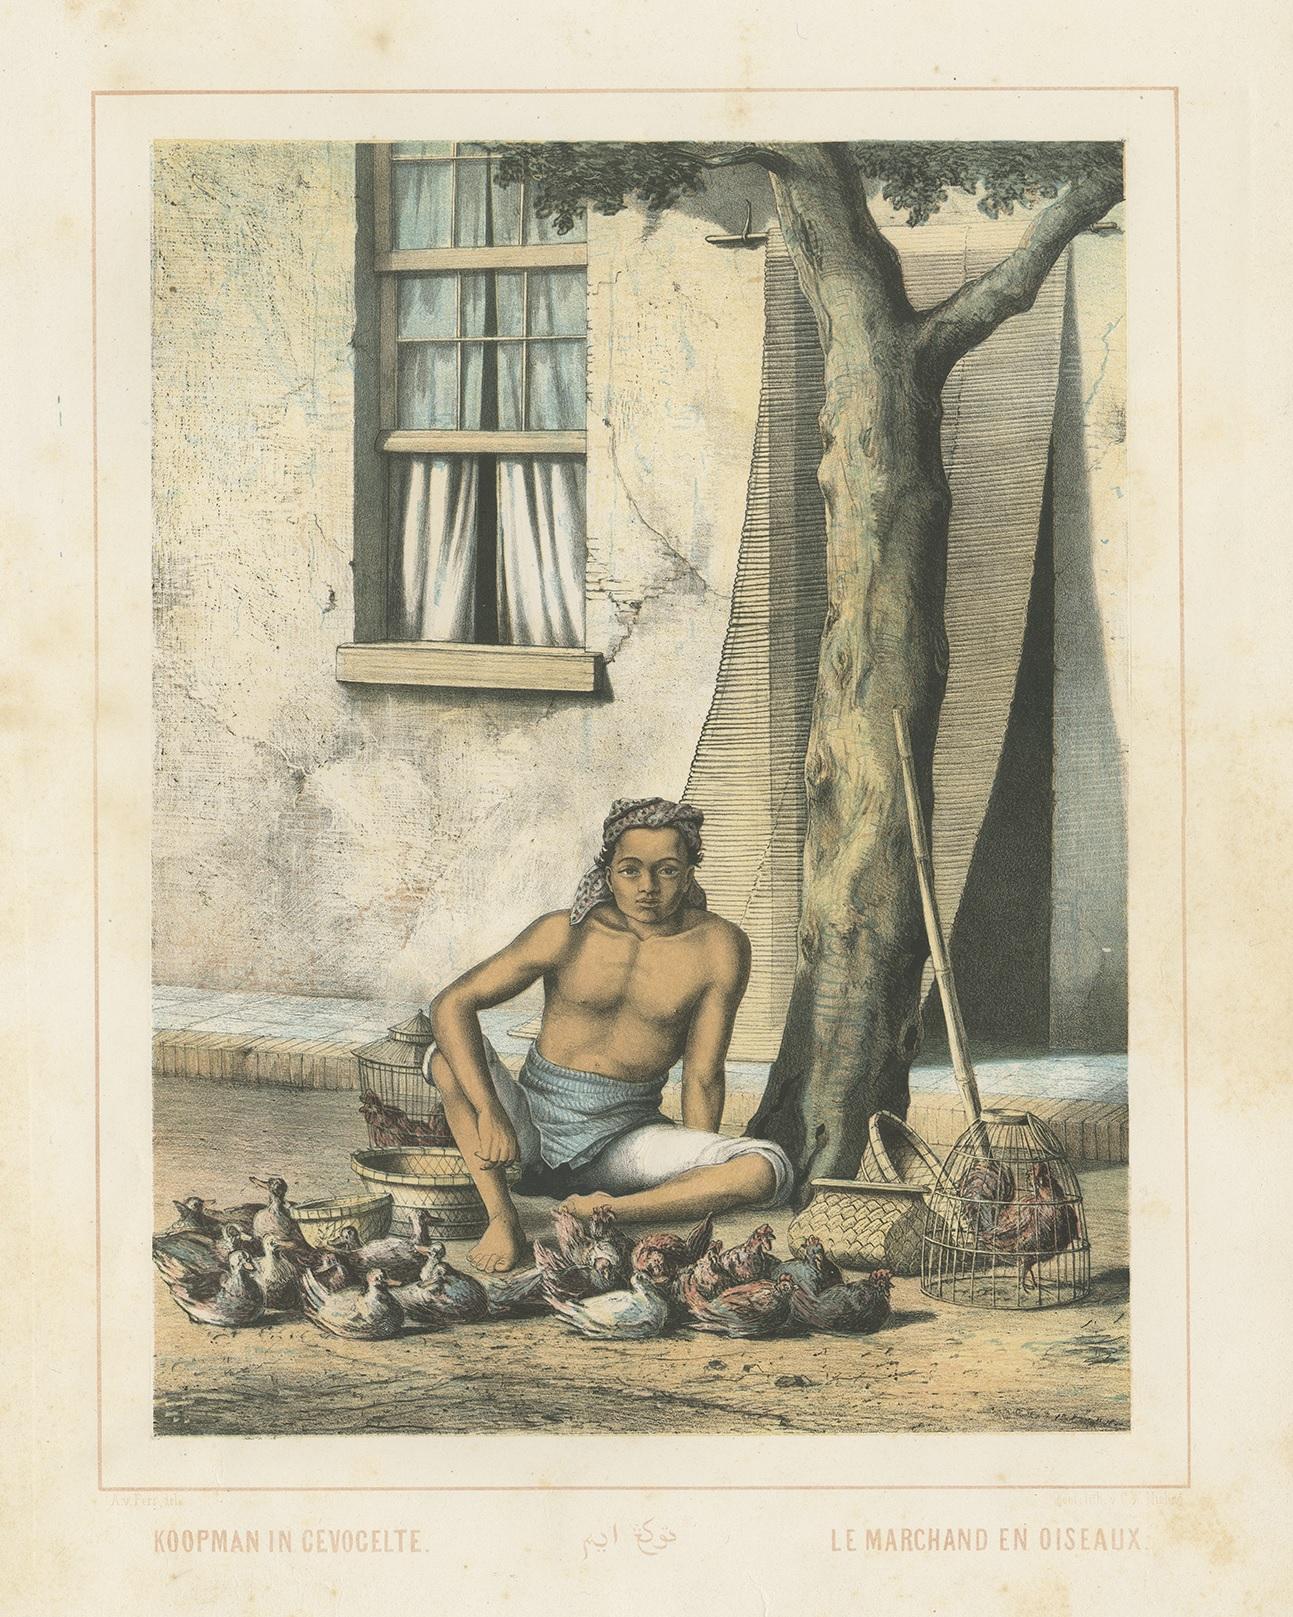 Antique print titled 'Koopman in Gevogelte - Le Marchand en Oiseaux'. Colored lithograph of a Javanese poultry merchant. This print originates from 'Nederlandsch Oost-Indische typen' after work by Auguste van Pers (1815-1871) a Dutch artist who